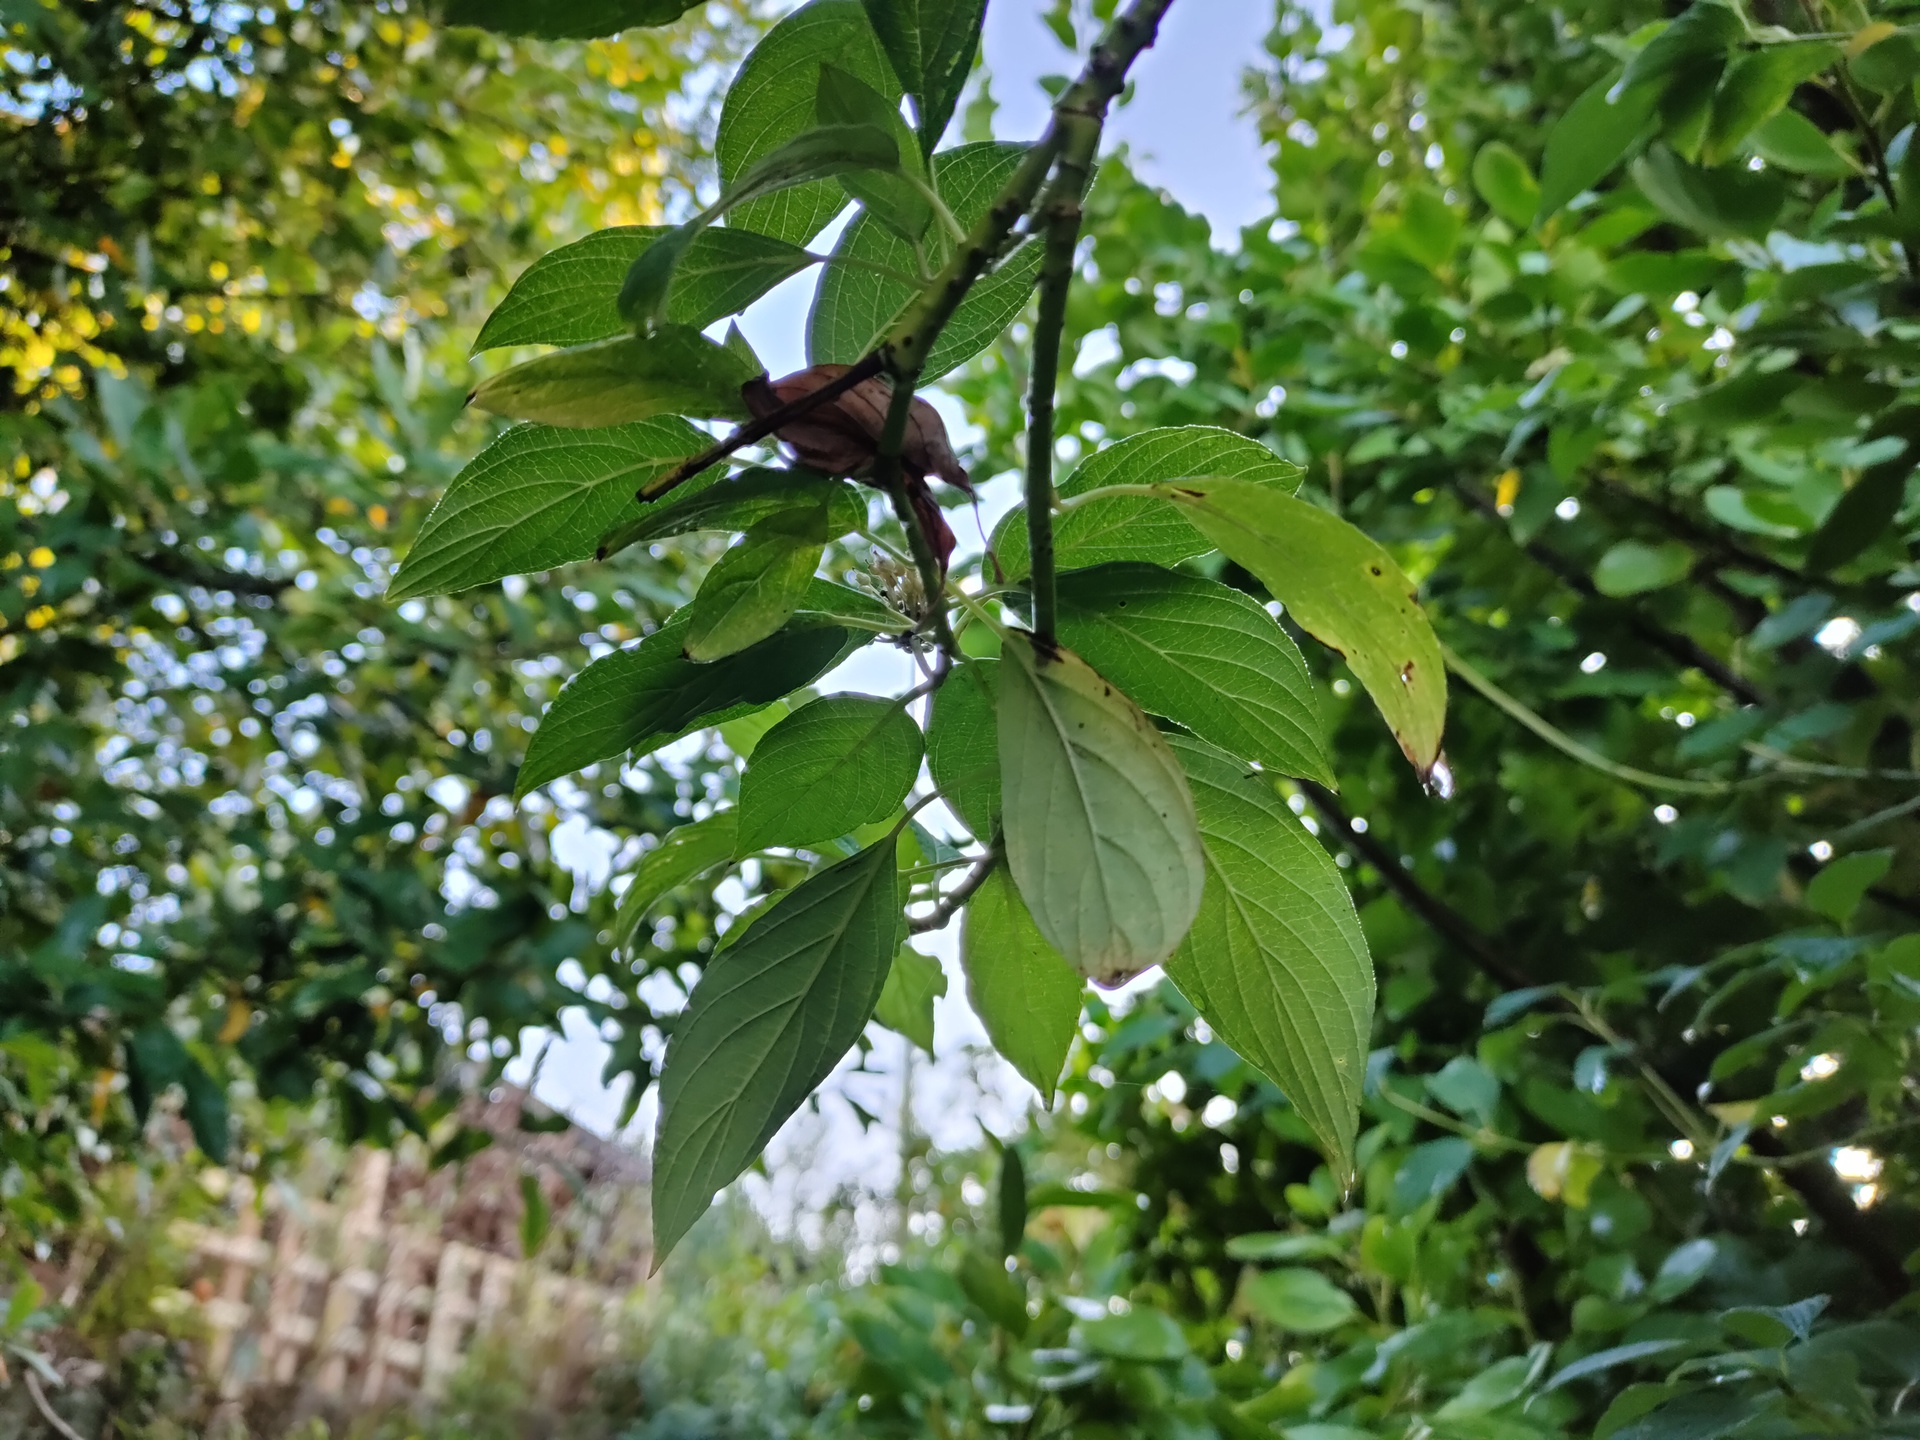 Realme X2 Pro camera sample detail of leaves